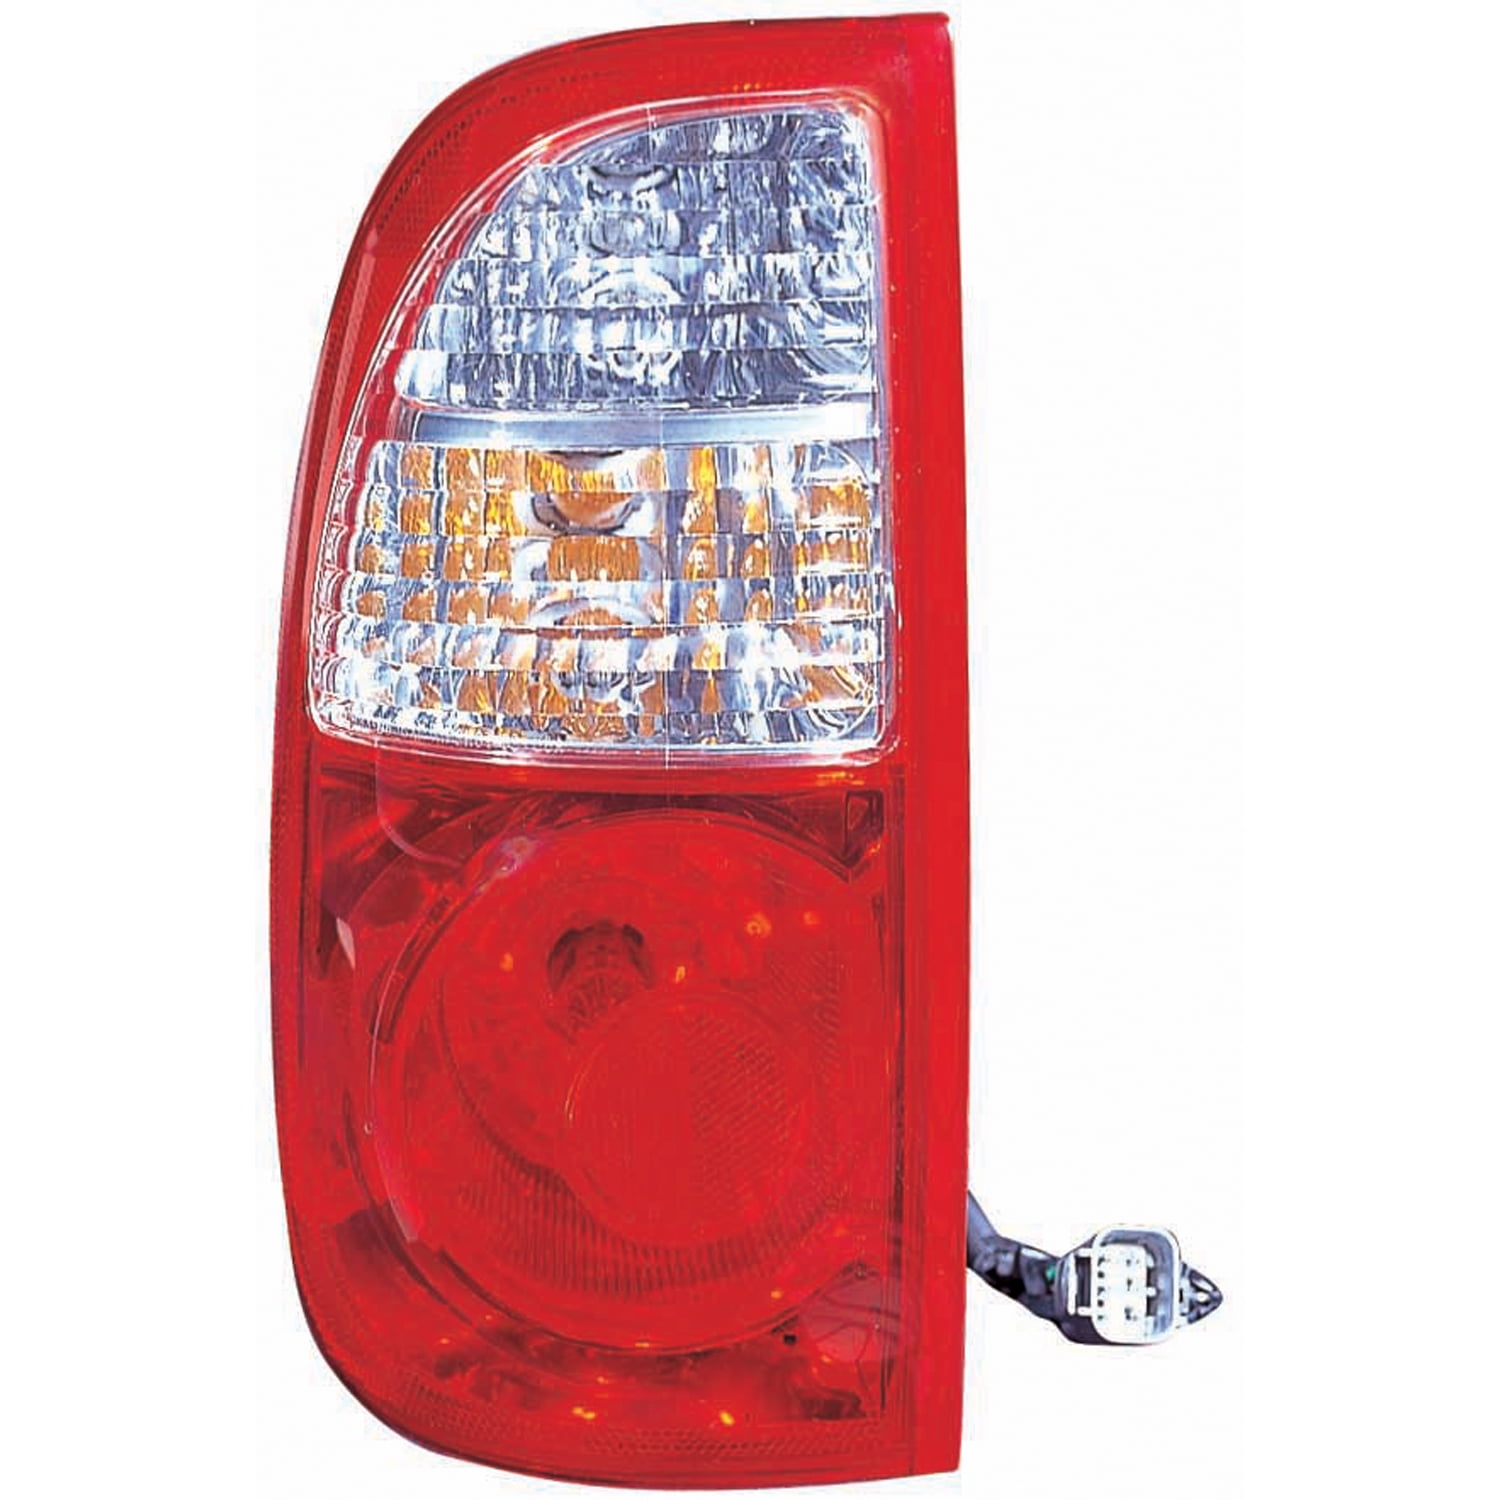 New CAPA Certified Standard Replacement Left Tail Light Assembly, Fits